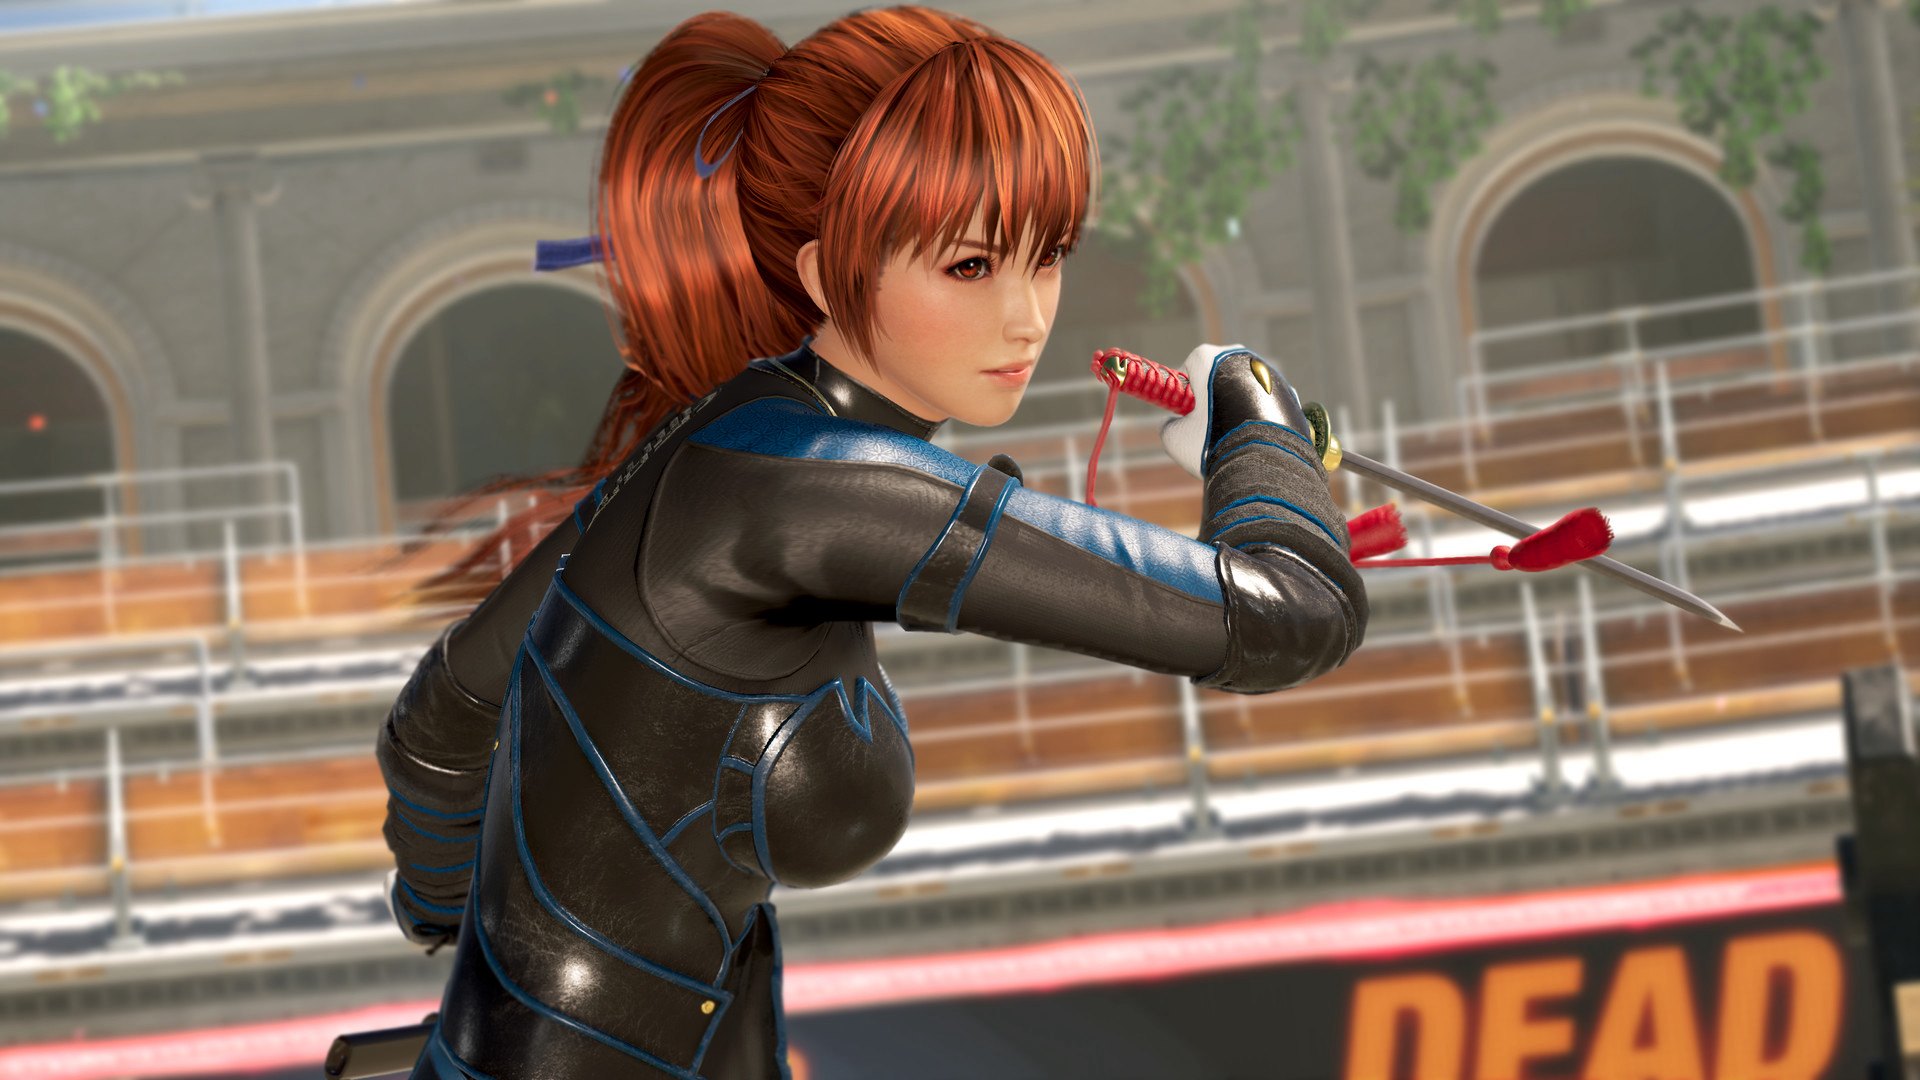 DEAD OR ALIVE 6 Digital Deluxe Edition Steam Altergift [USD 120.02]